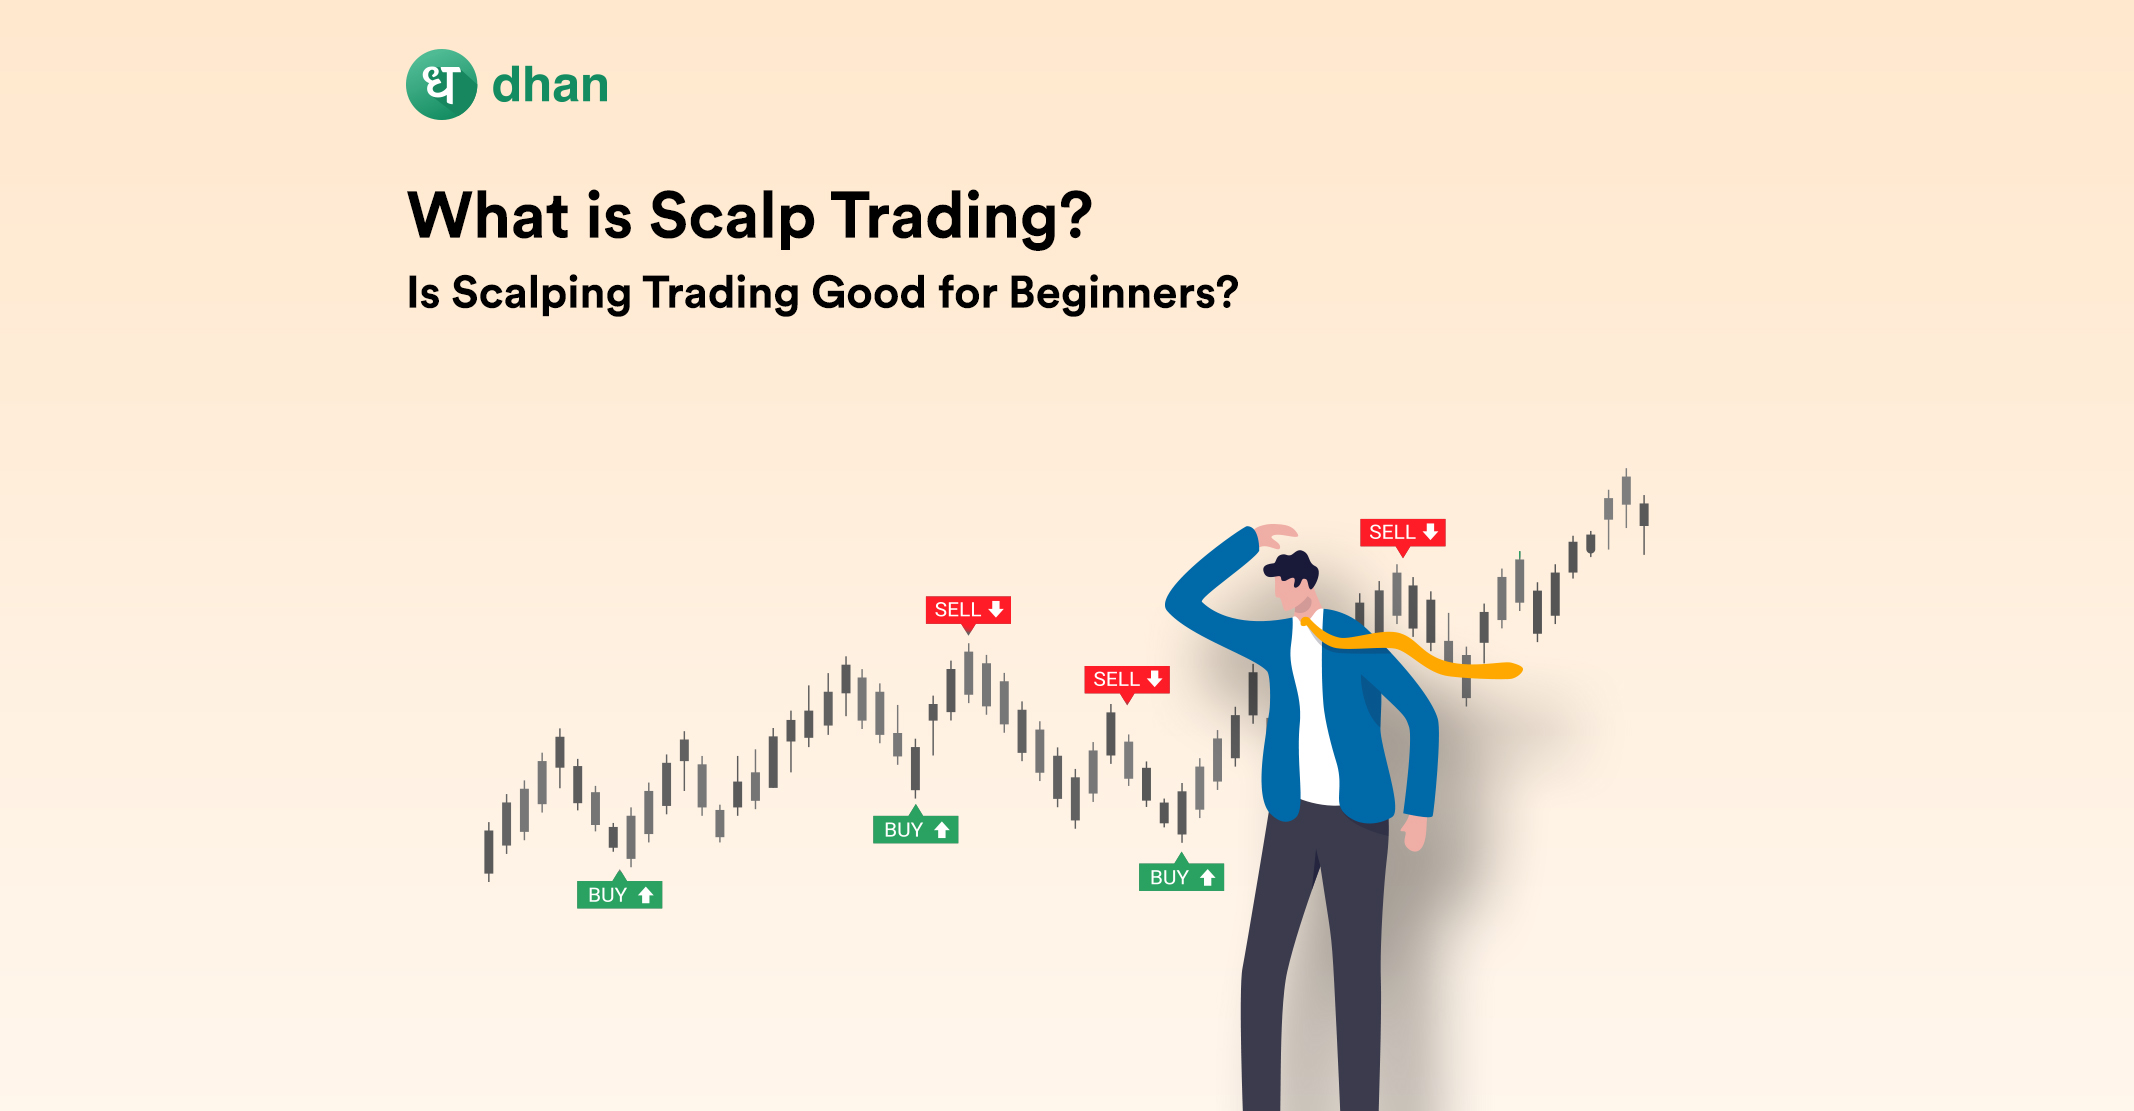 What is Scalp Trading?